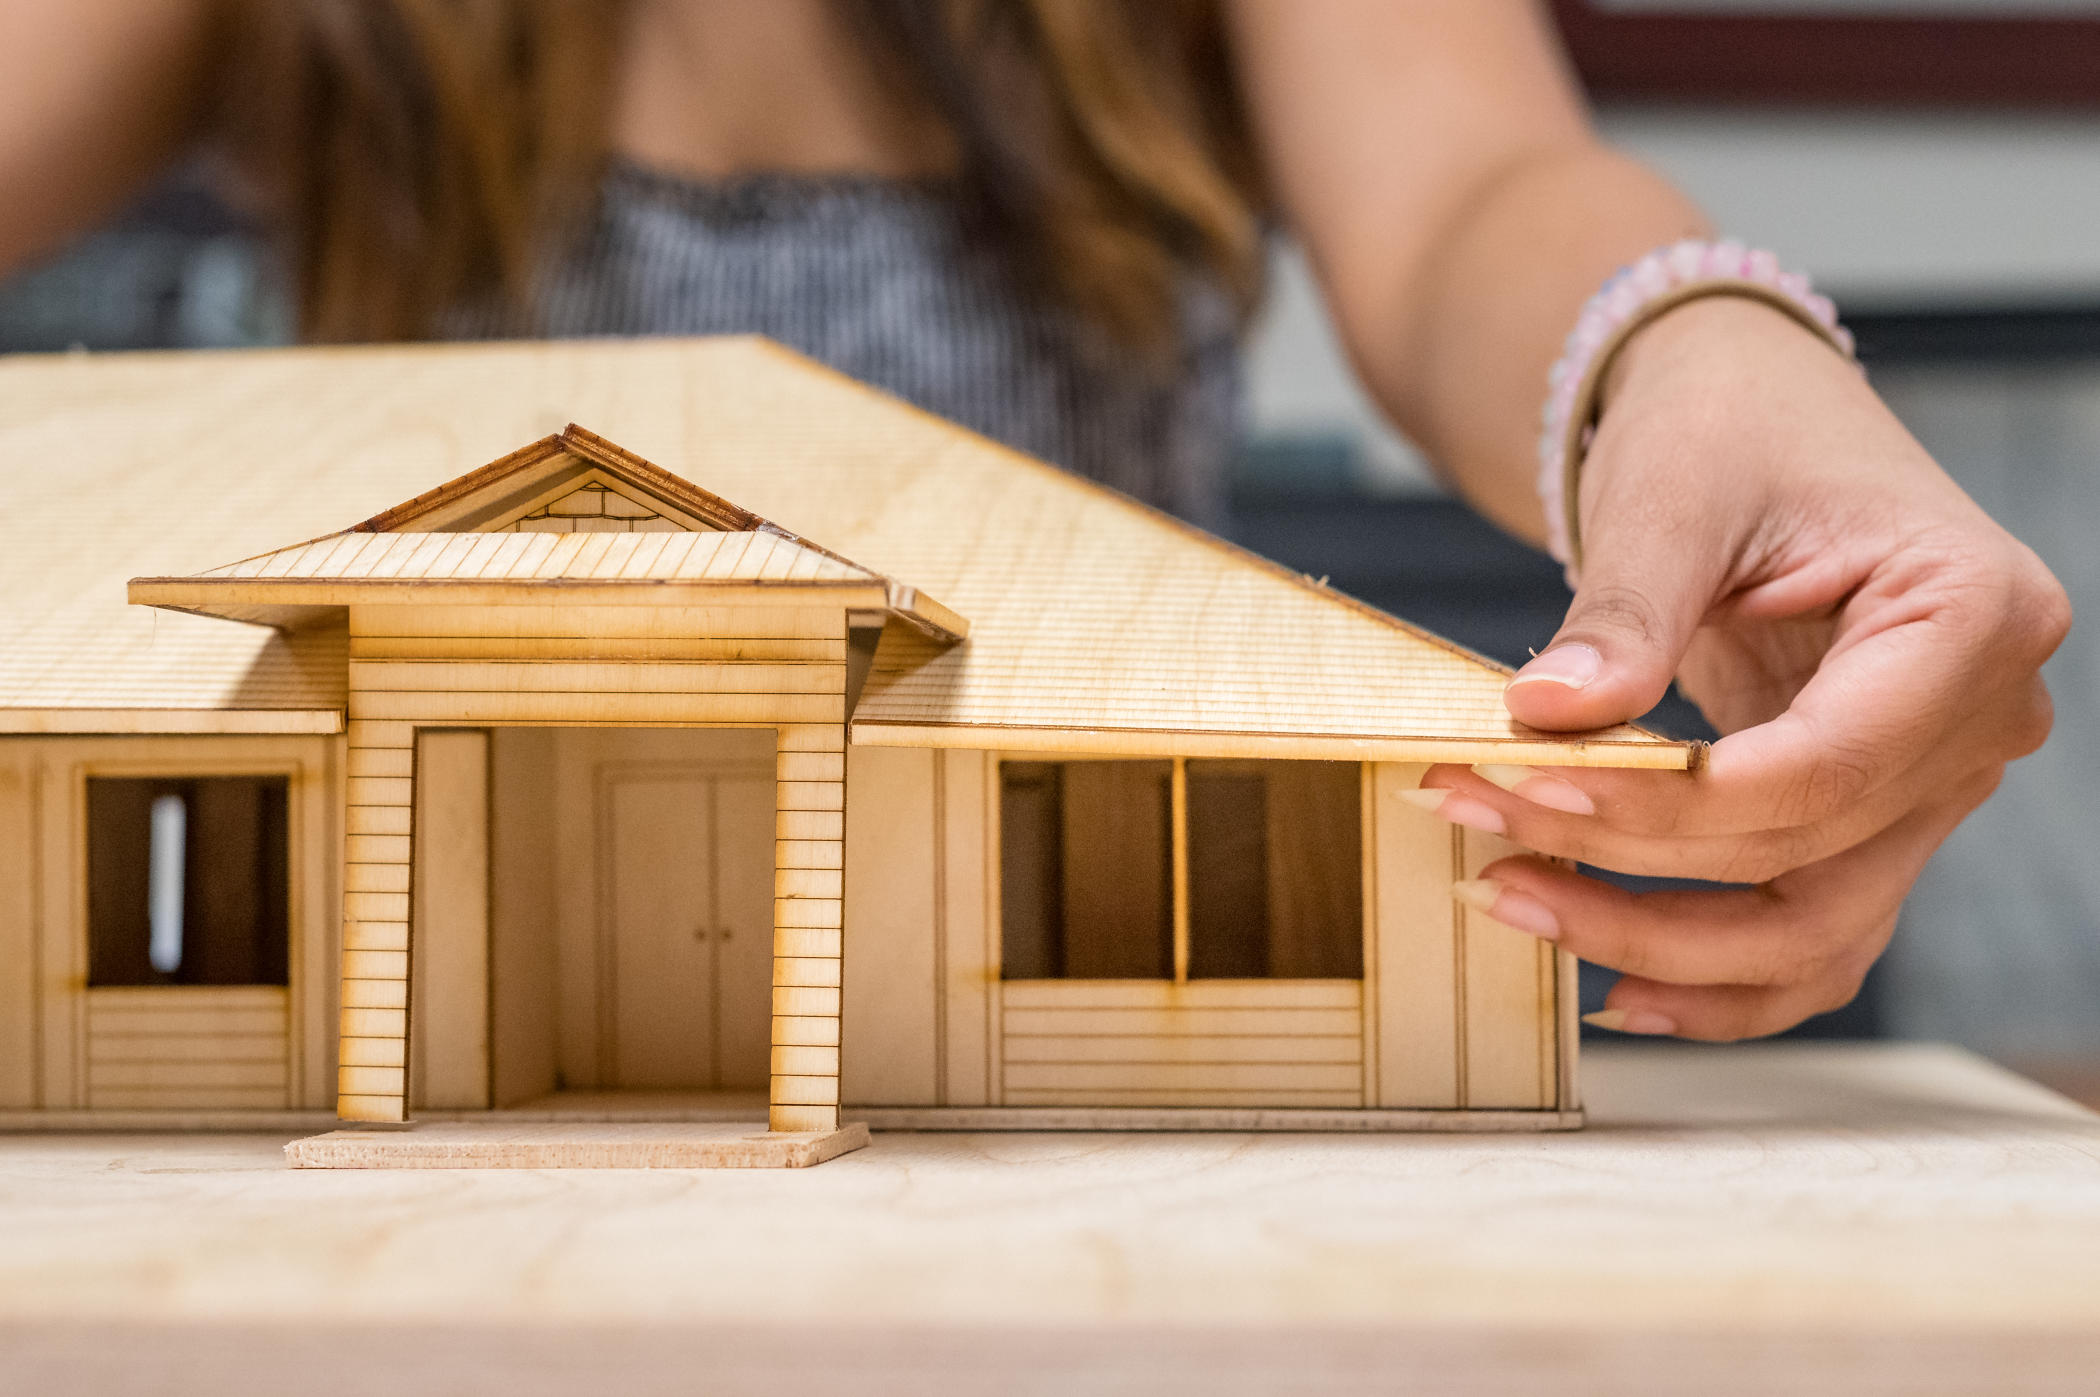 Hands adjust the positioning of a roof on a small wooden model of a home, with the view cast toward the front entrance with a covered porch flanked by large windows.